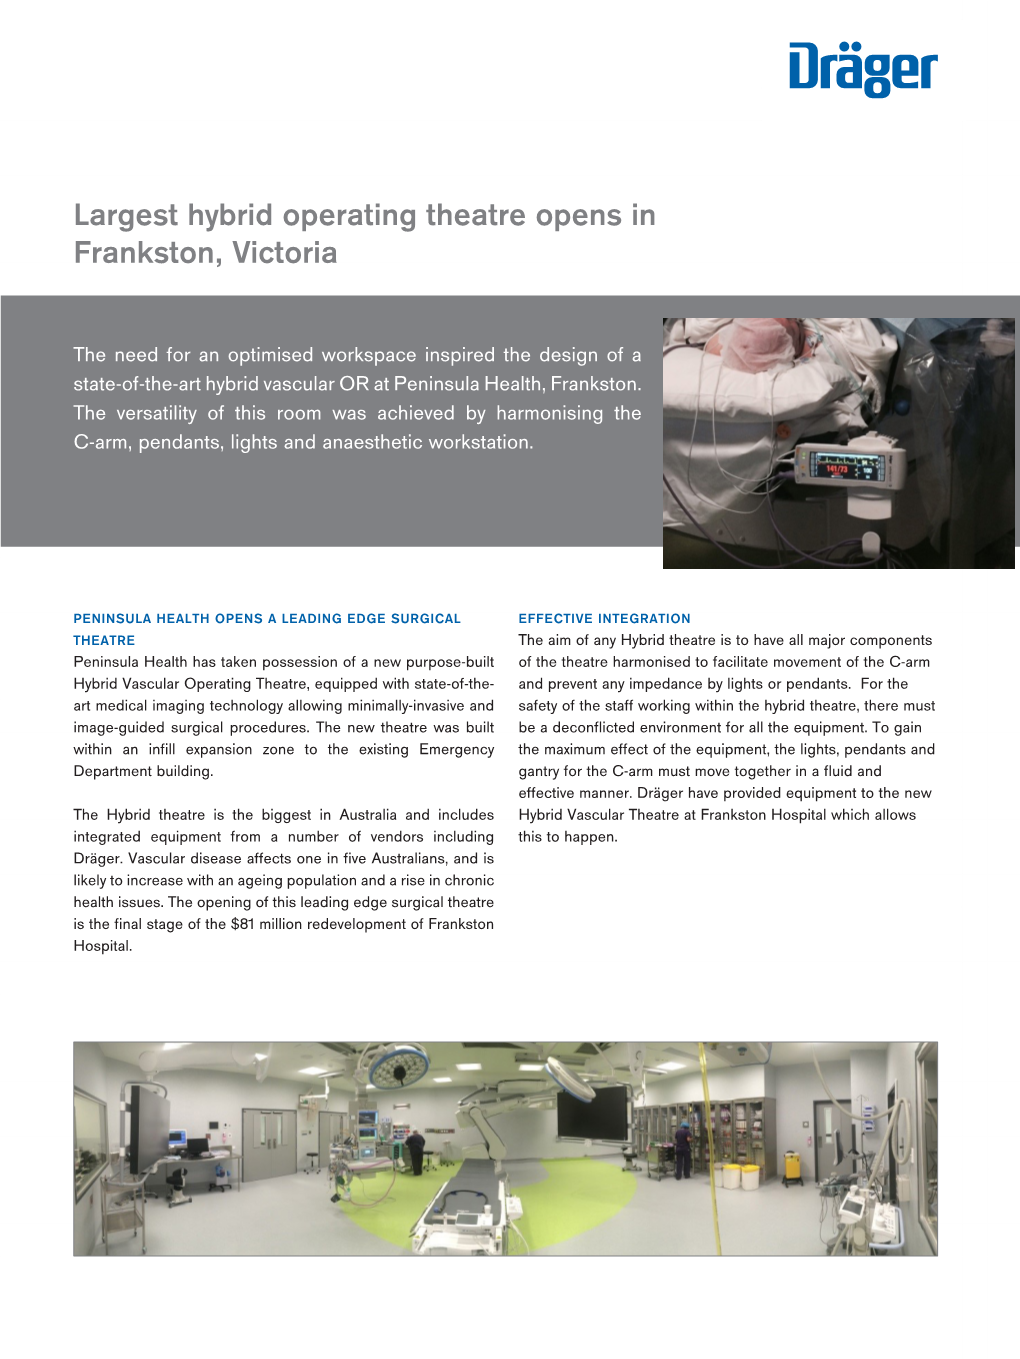 Largest Hybrid Operating Theatre Opens in Frankston, Victoria